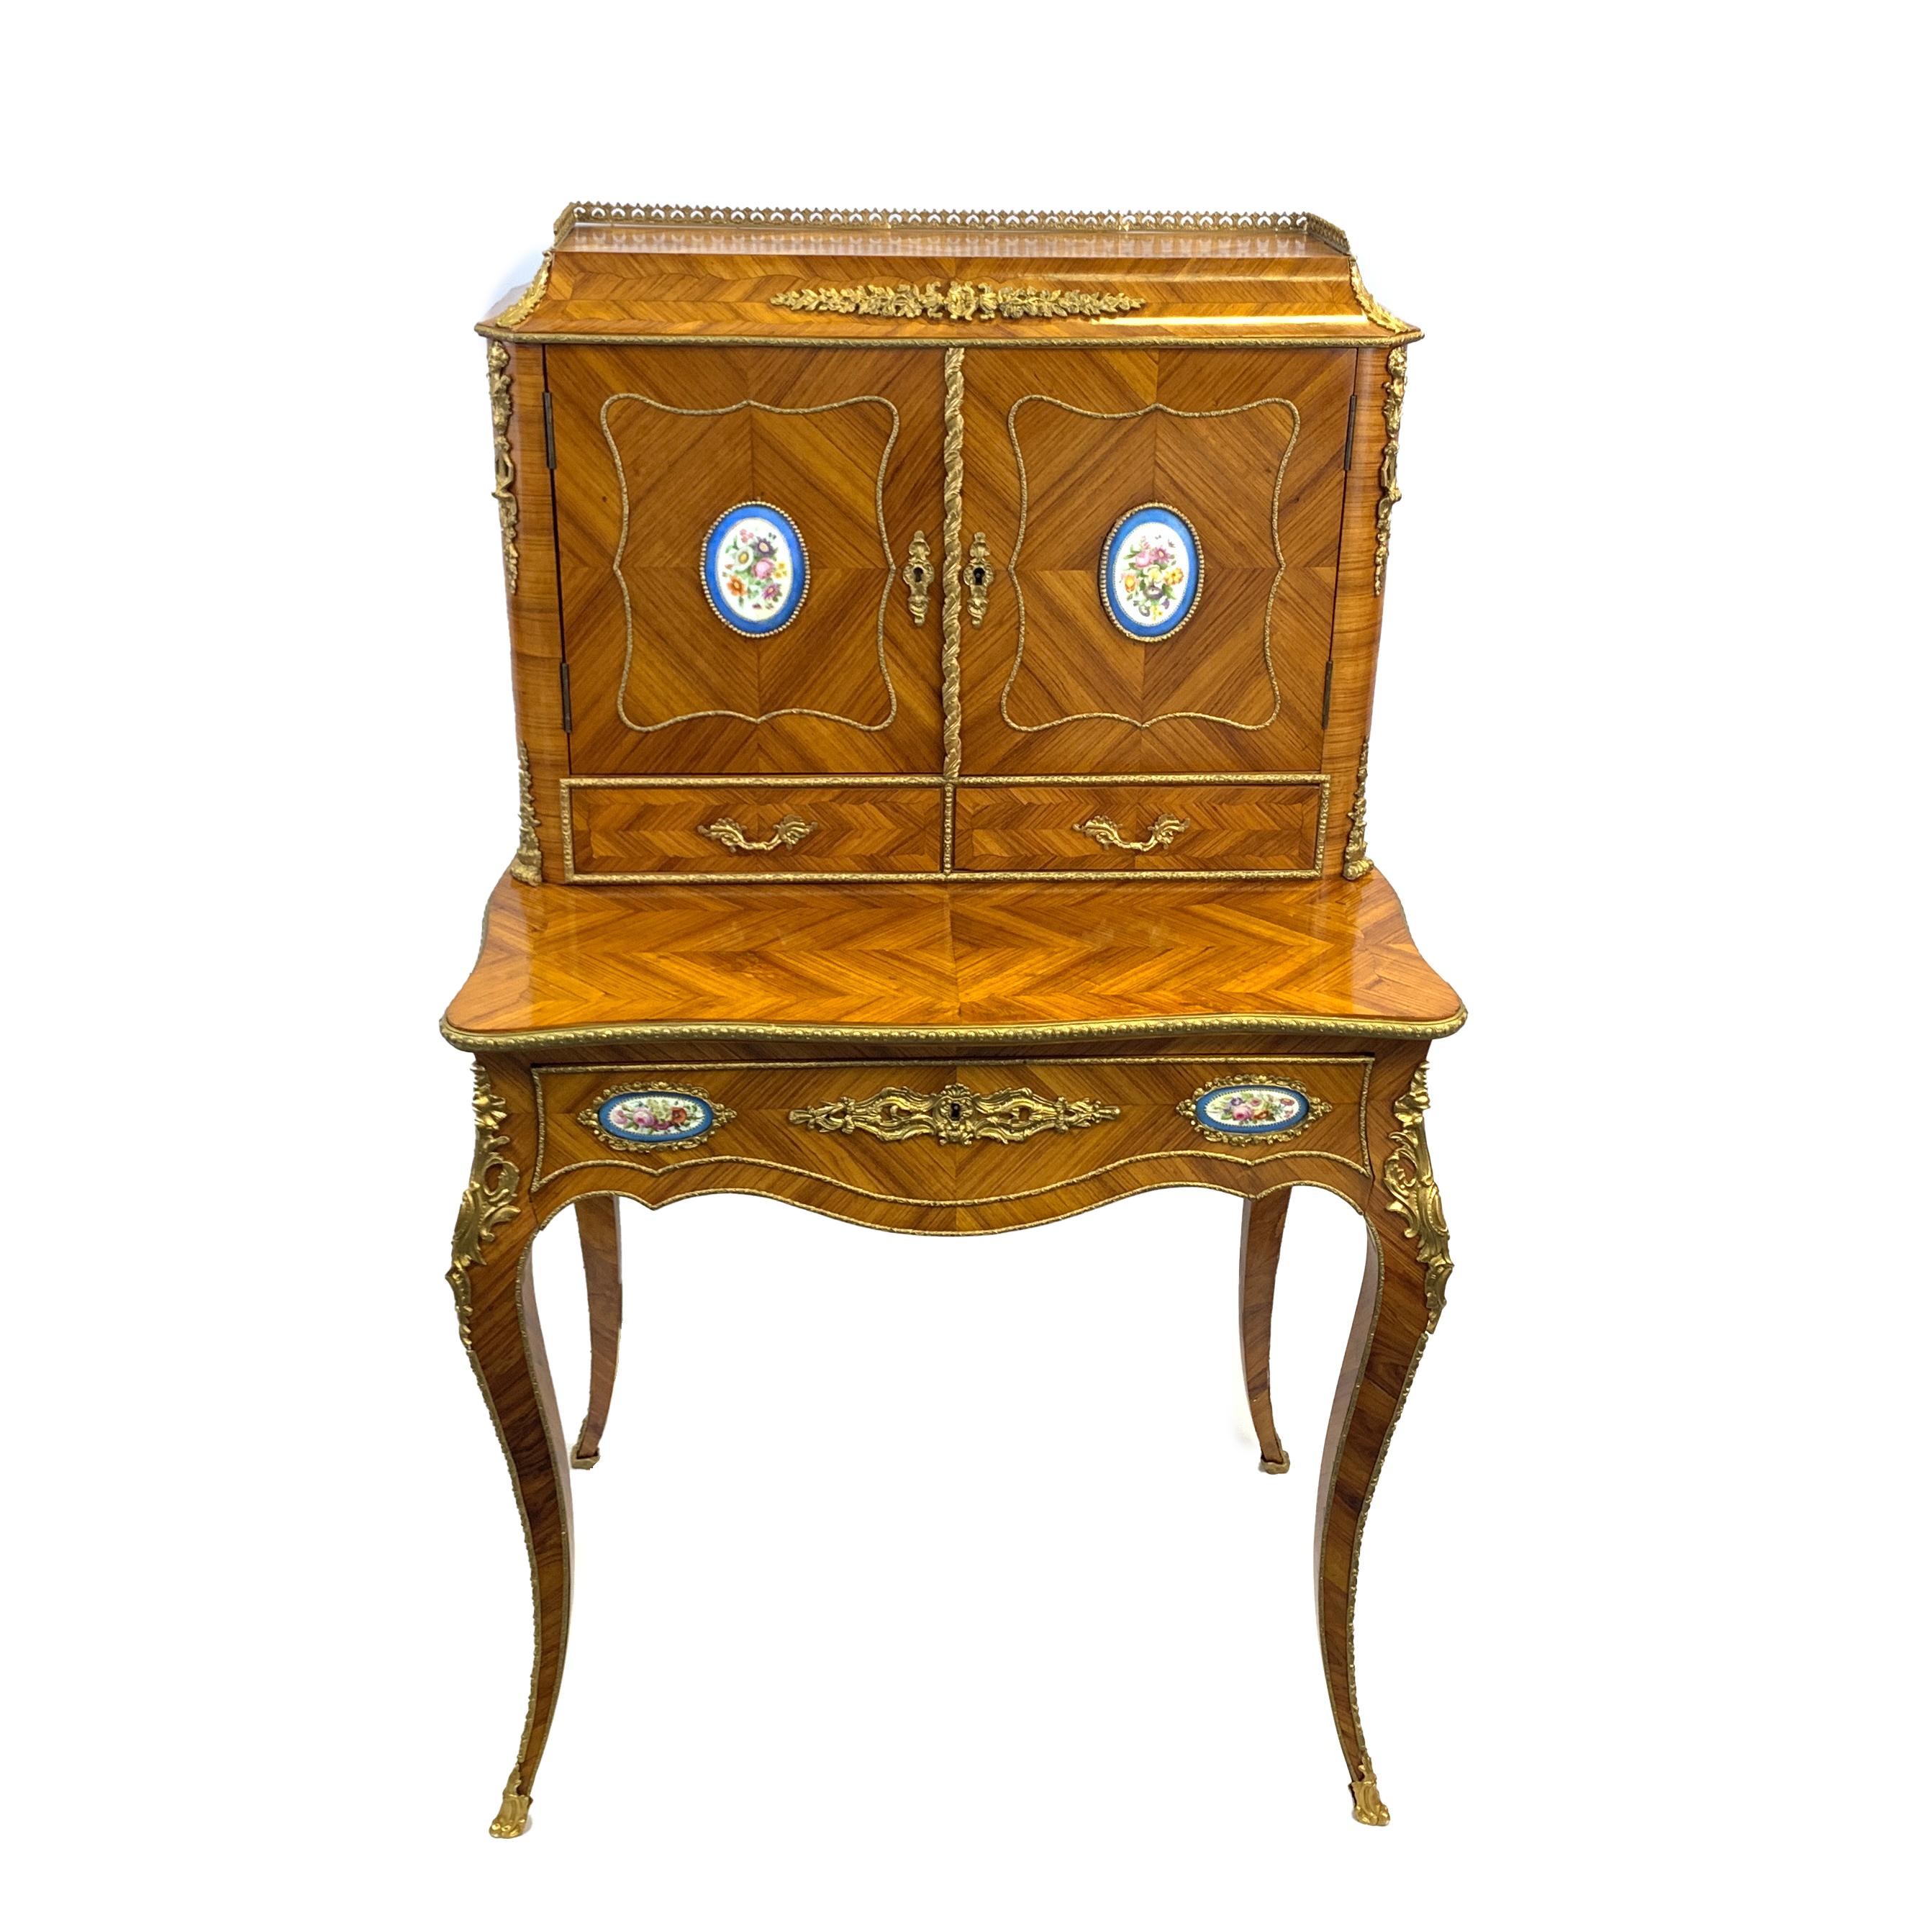 A late 19th century French kingwood, gilt metal and porcelain mounted Bonheur du jour, with quarter veneered panels in crossbanded surrounds, the upper part with a cavetto top, applied floral foliage and pierced three quarter gallery, enclosed by a